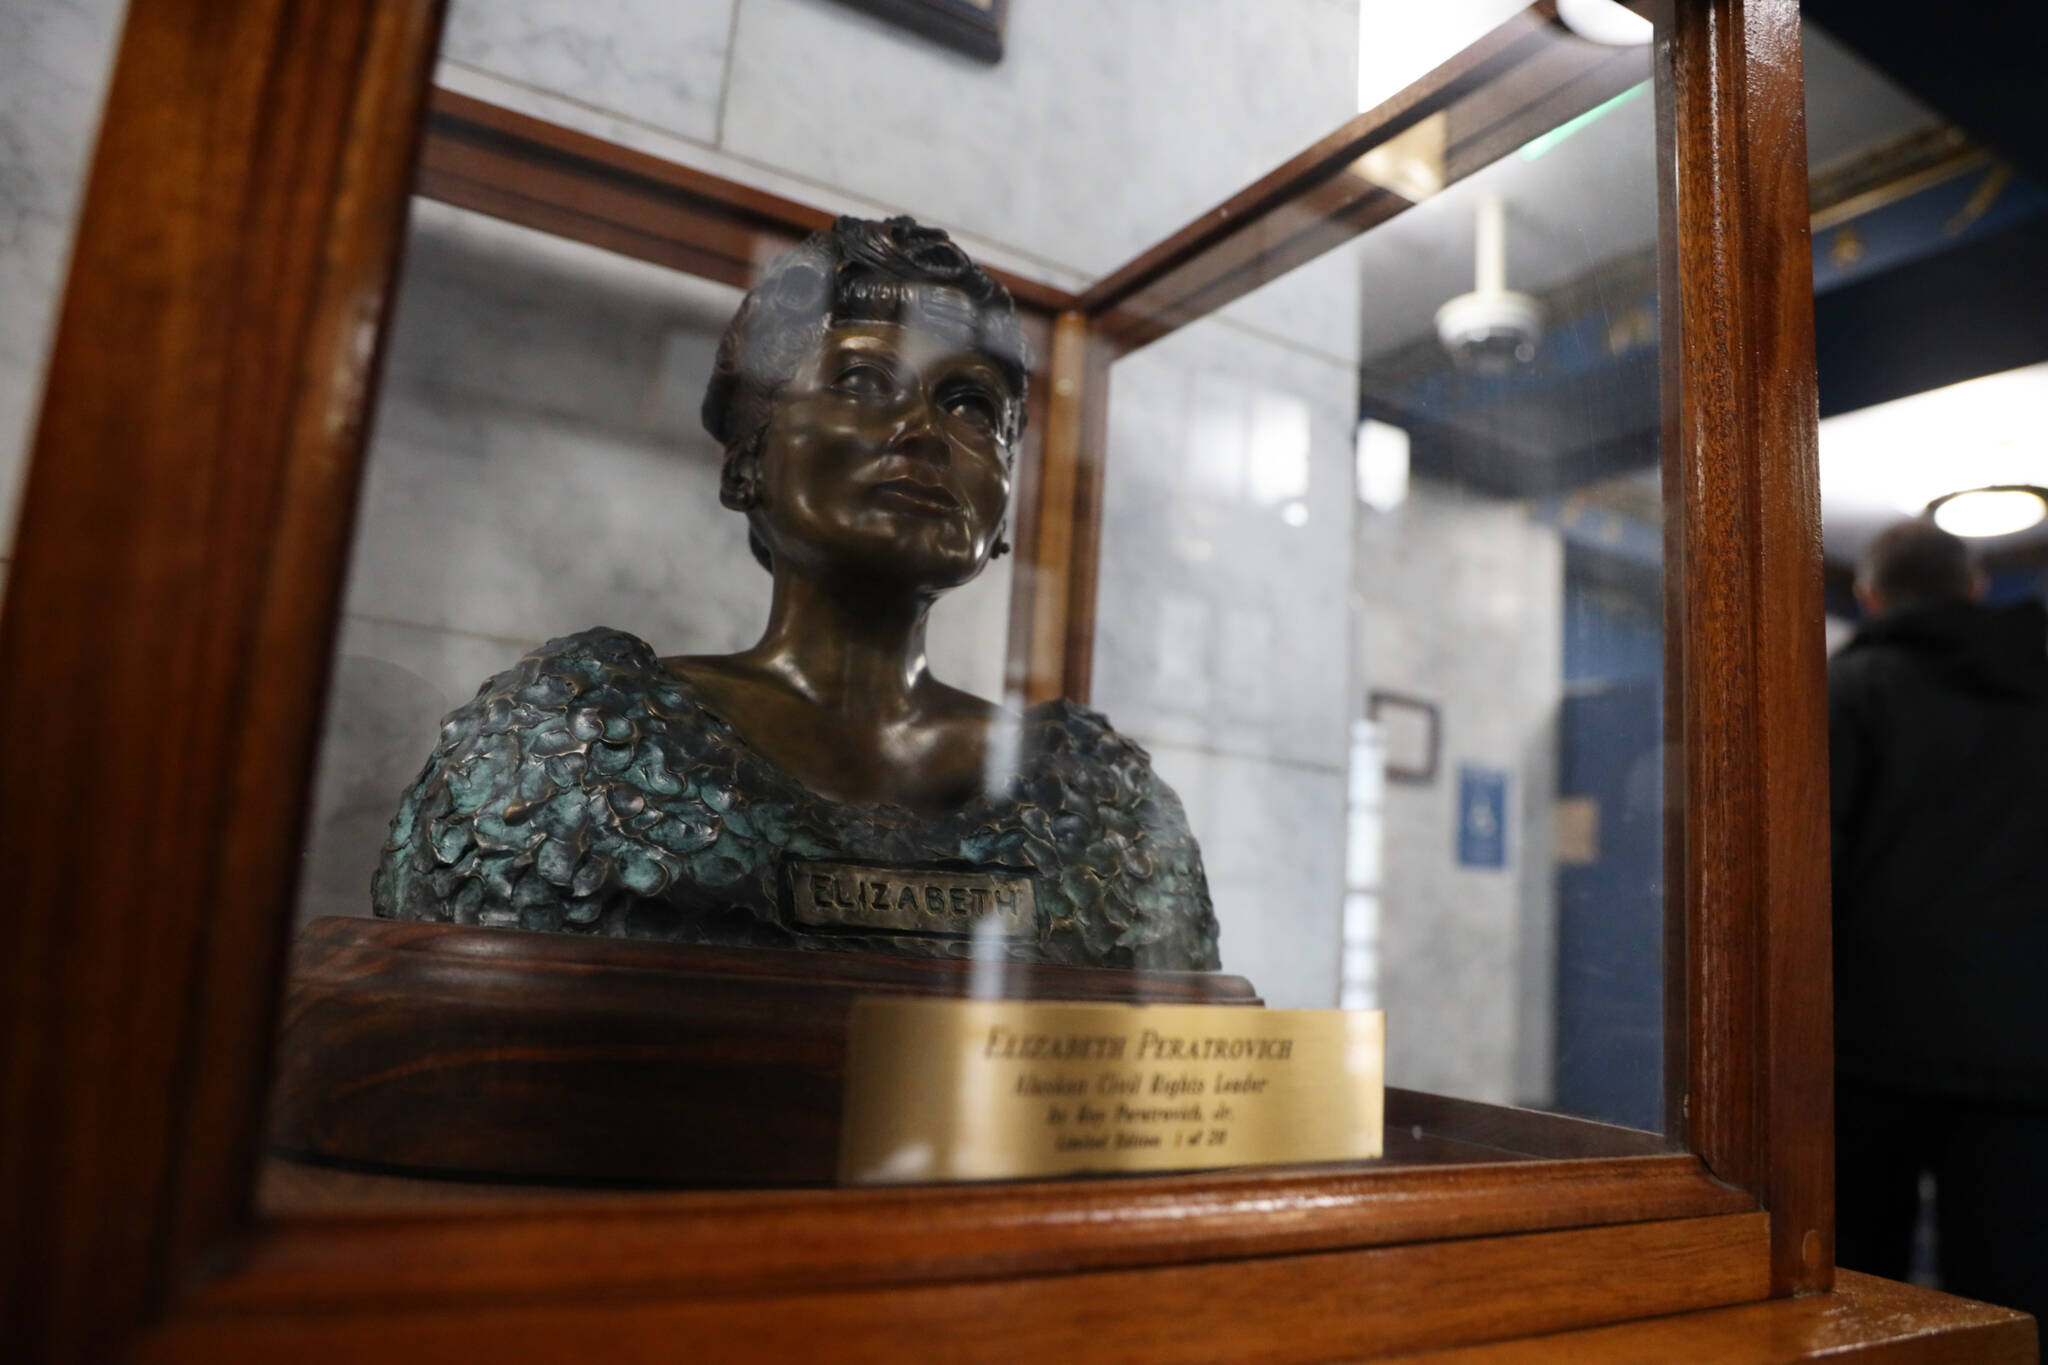 This photo shows the bronze bust of Elizabeth Peratrovich which is featured upon entering the lobby of the Alaska State Capitol. This Thursday, Feb. 16, the state will observes Elizabeth Peratrovich Day to recognize and honor her for her contributions to anti-discrimination in the state. (Clarise Larson / Juneau Empire)